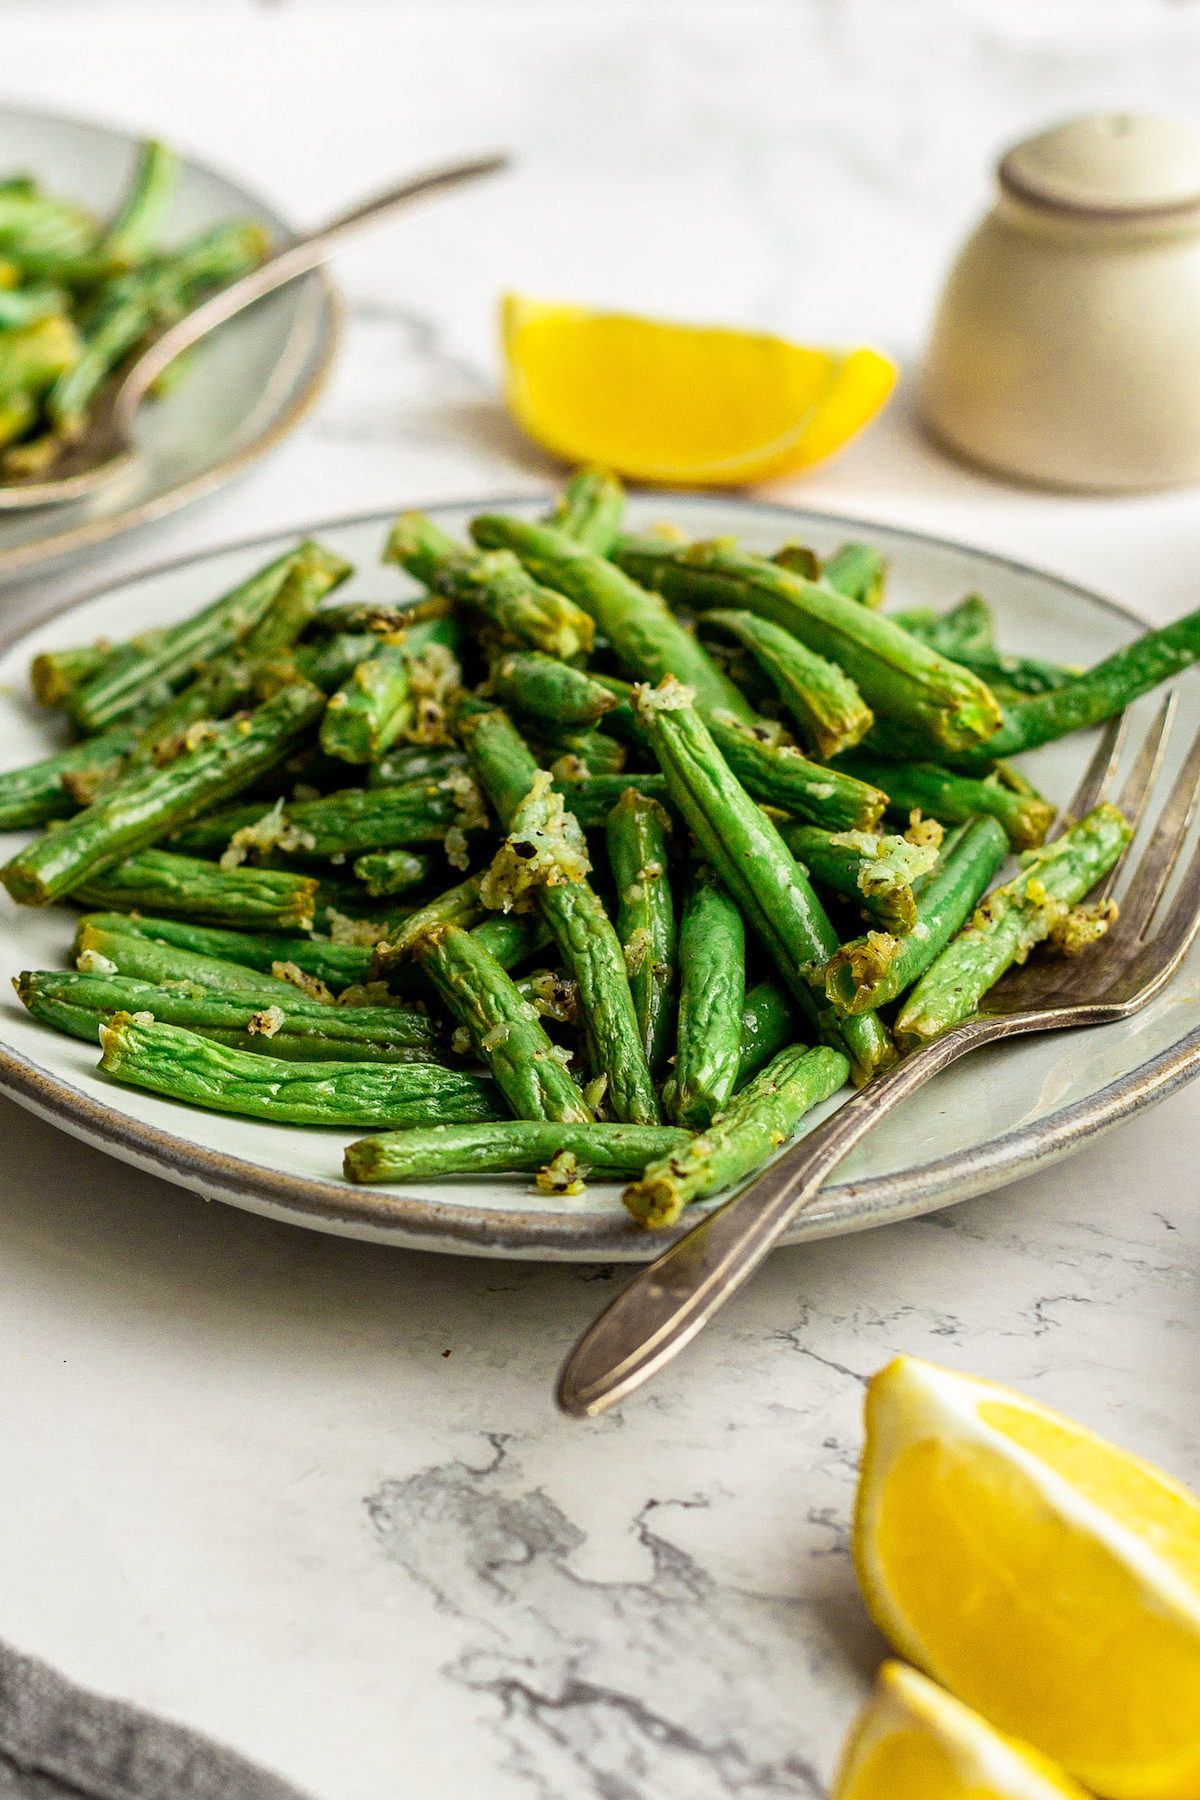 Cooked green beans with garlic. Lemon wedges and other plates of green beans are visible in the shot, along with salt and pepper shakers.